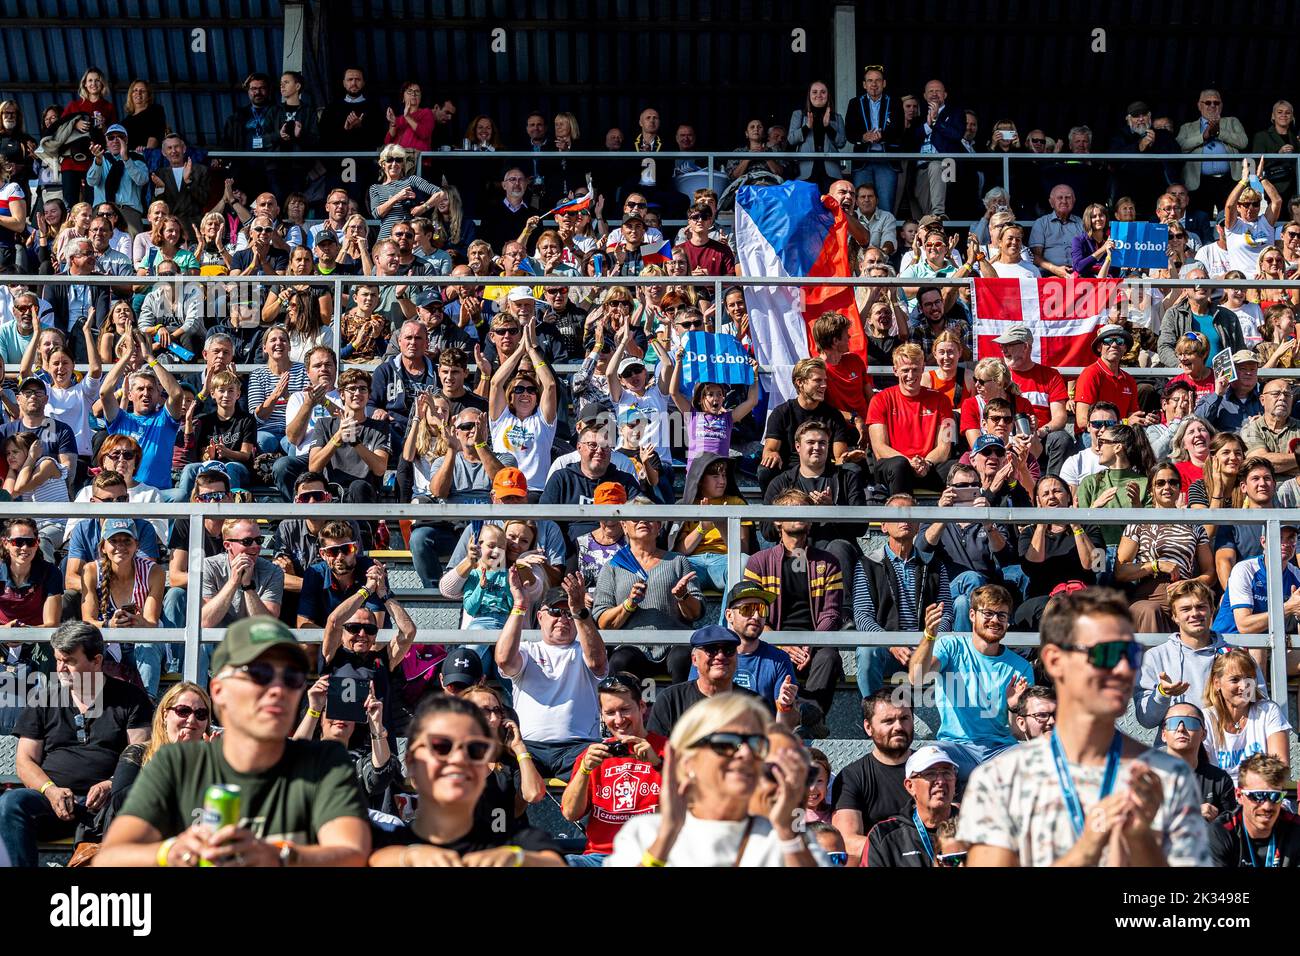 Racice, Czech Republic. 24th Sep, 2022. Fans during Day 7 of the 2022 World Rowing Championships at the Labe Arena Racice on September 24, 2022 in Racice, Czech Republic. Credit: Ondrej Hajek/CTK Photo/Alamy Live News Stock Photo